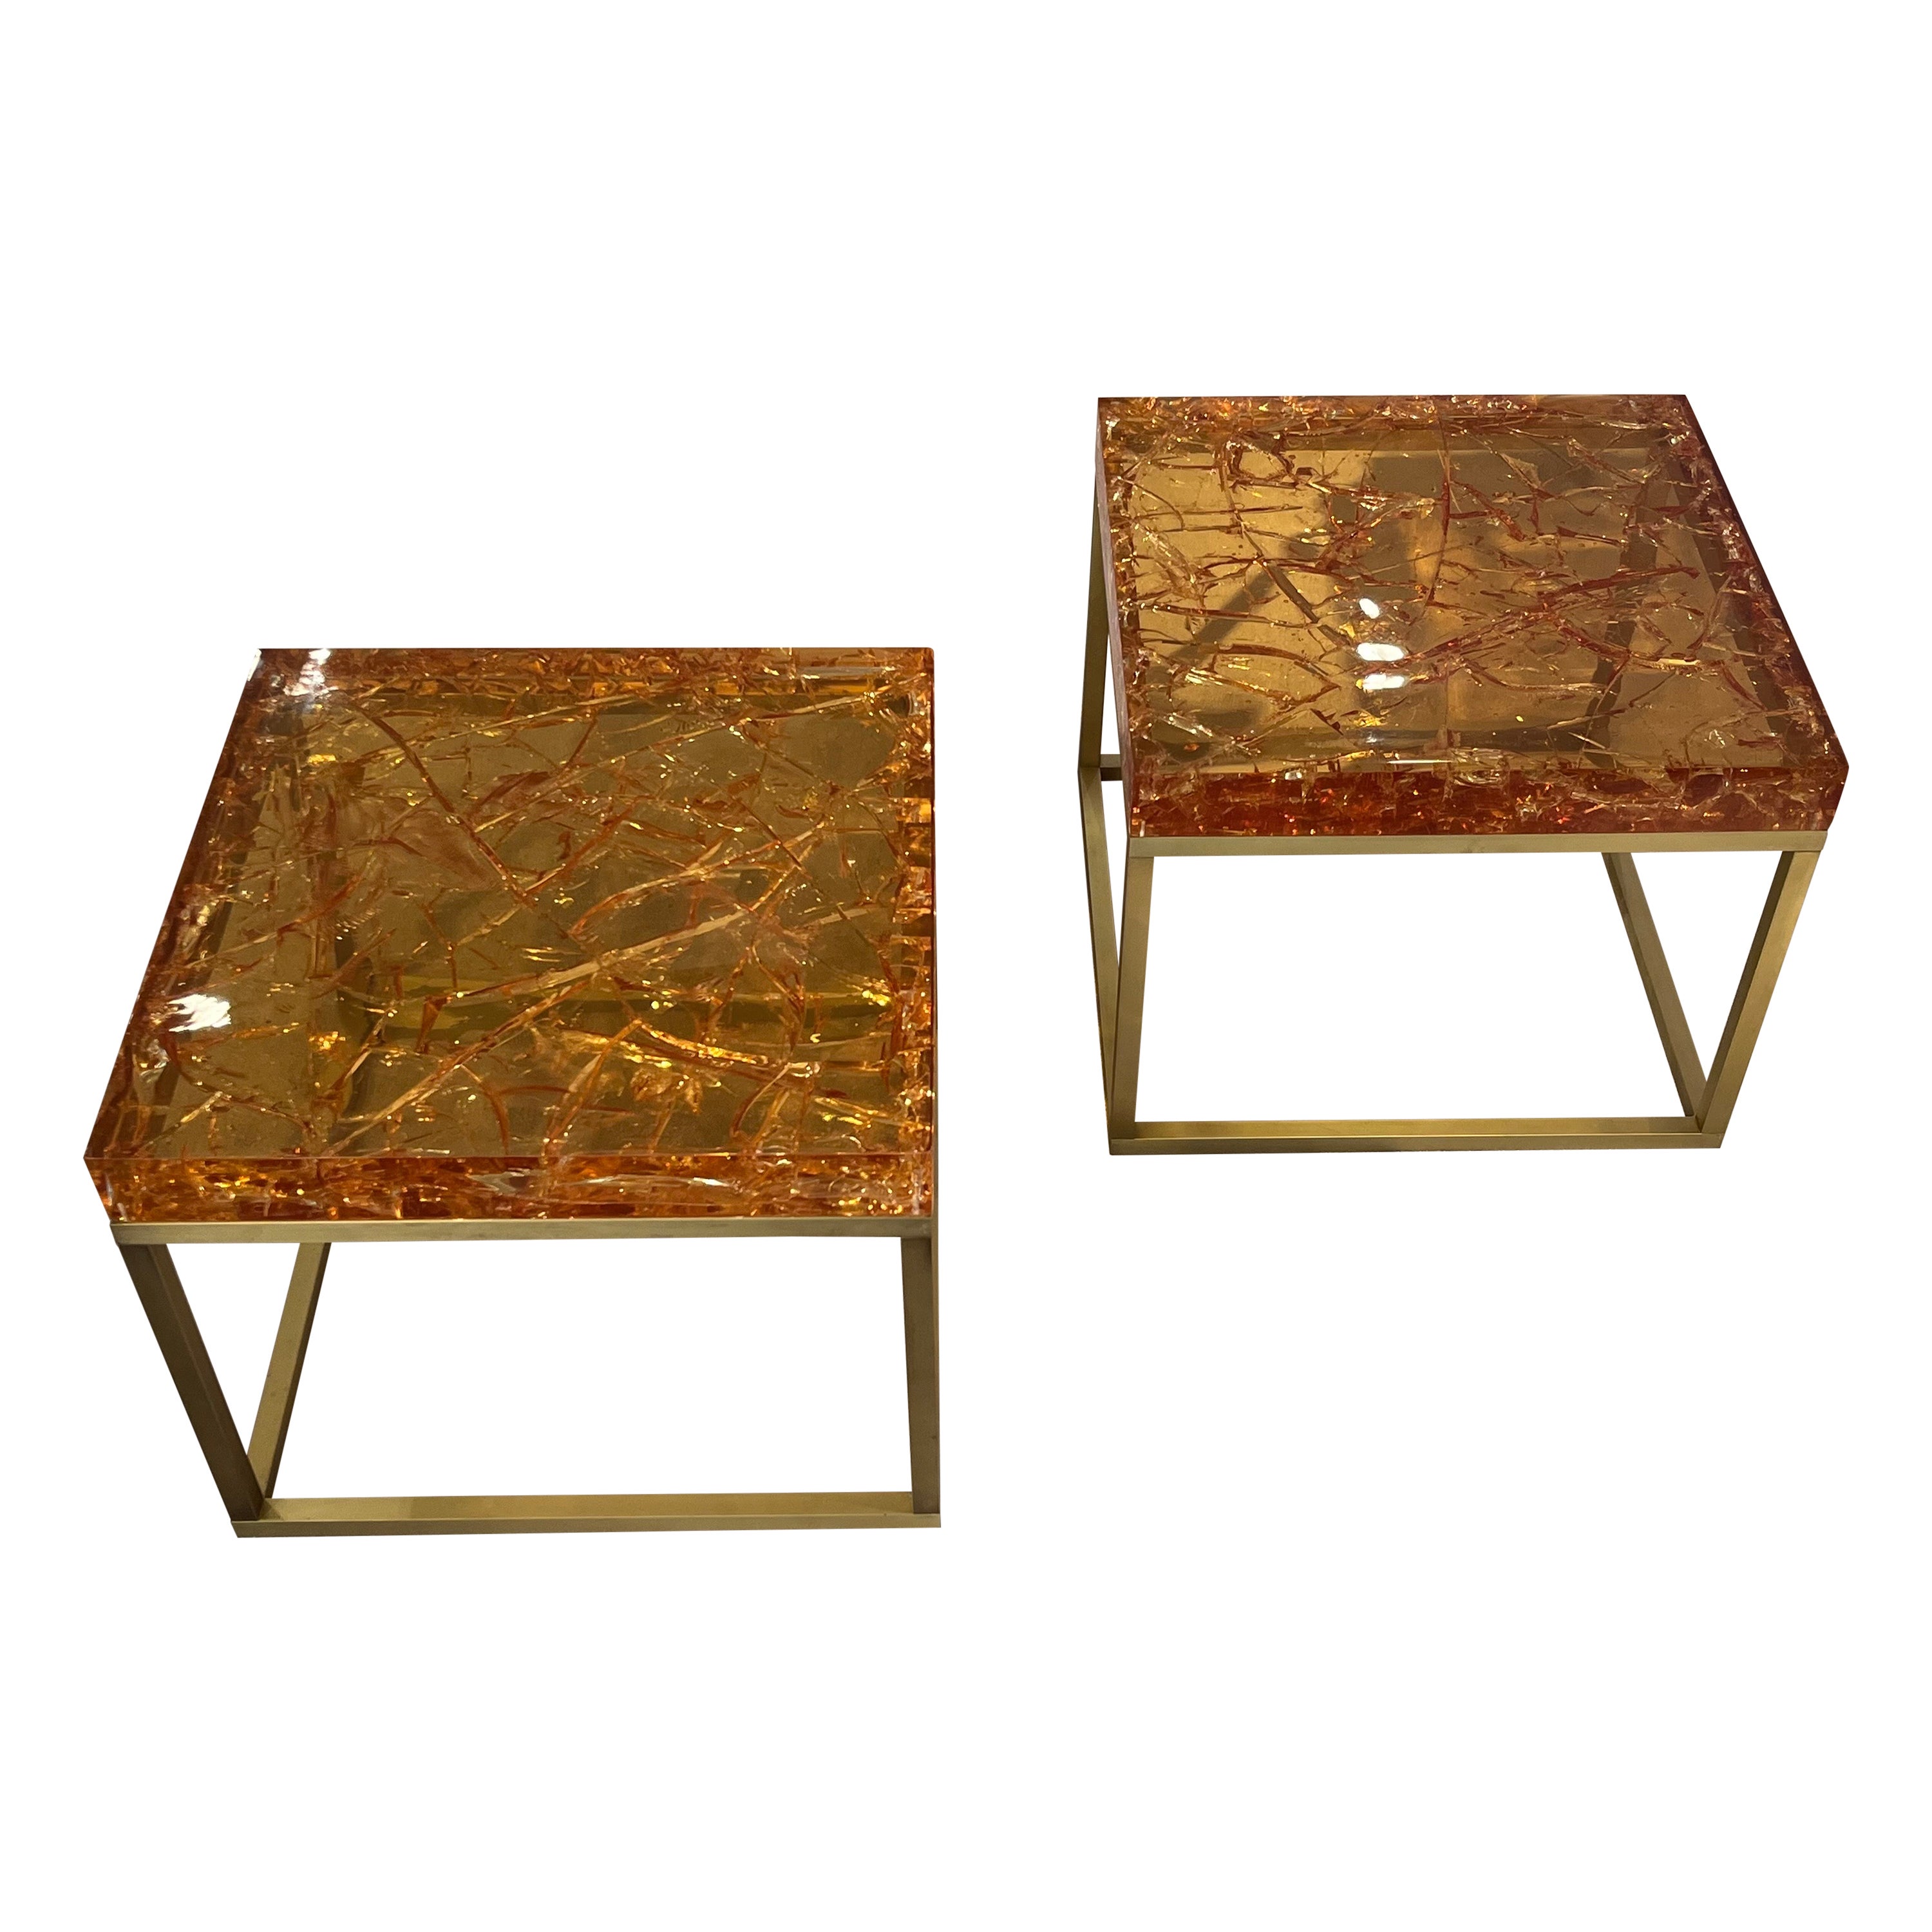 Pair Of Fractal Resin Tables By Giraudon For Sale